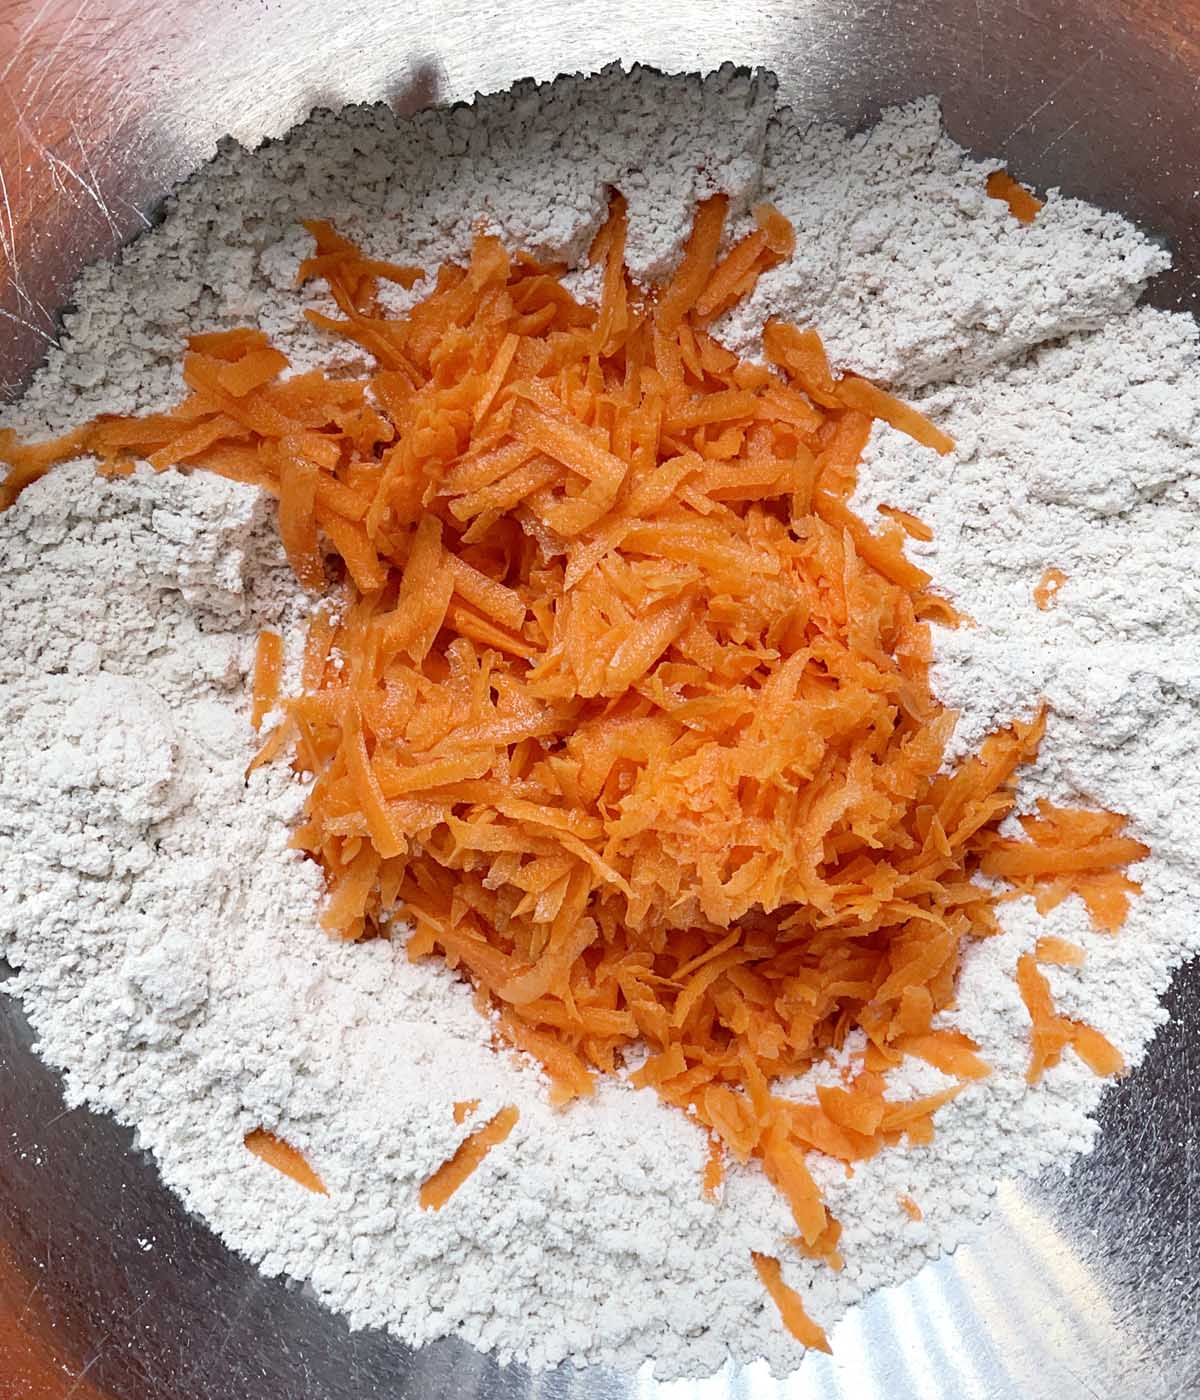 Grated orange carrot in a bowl containing white flours.